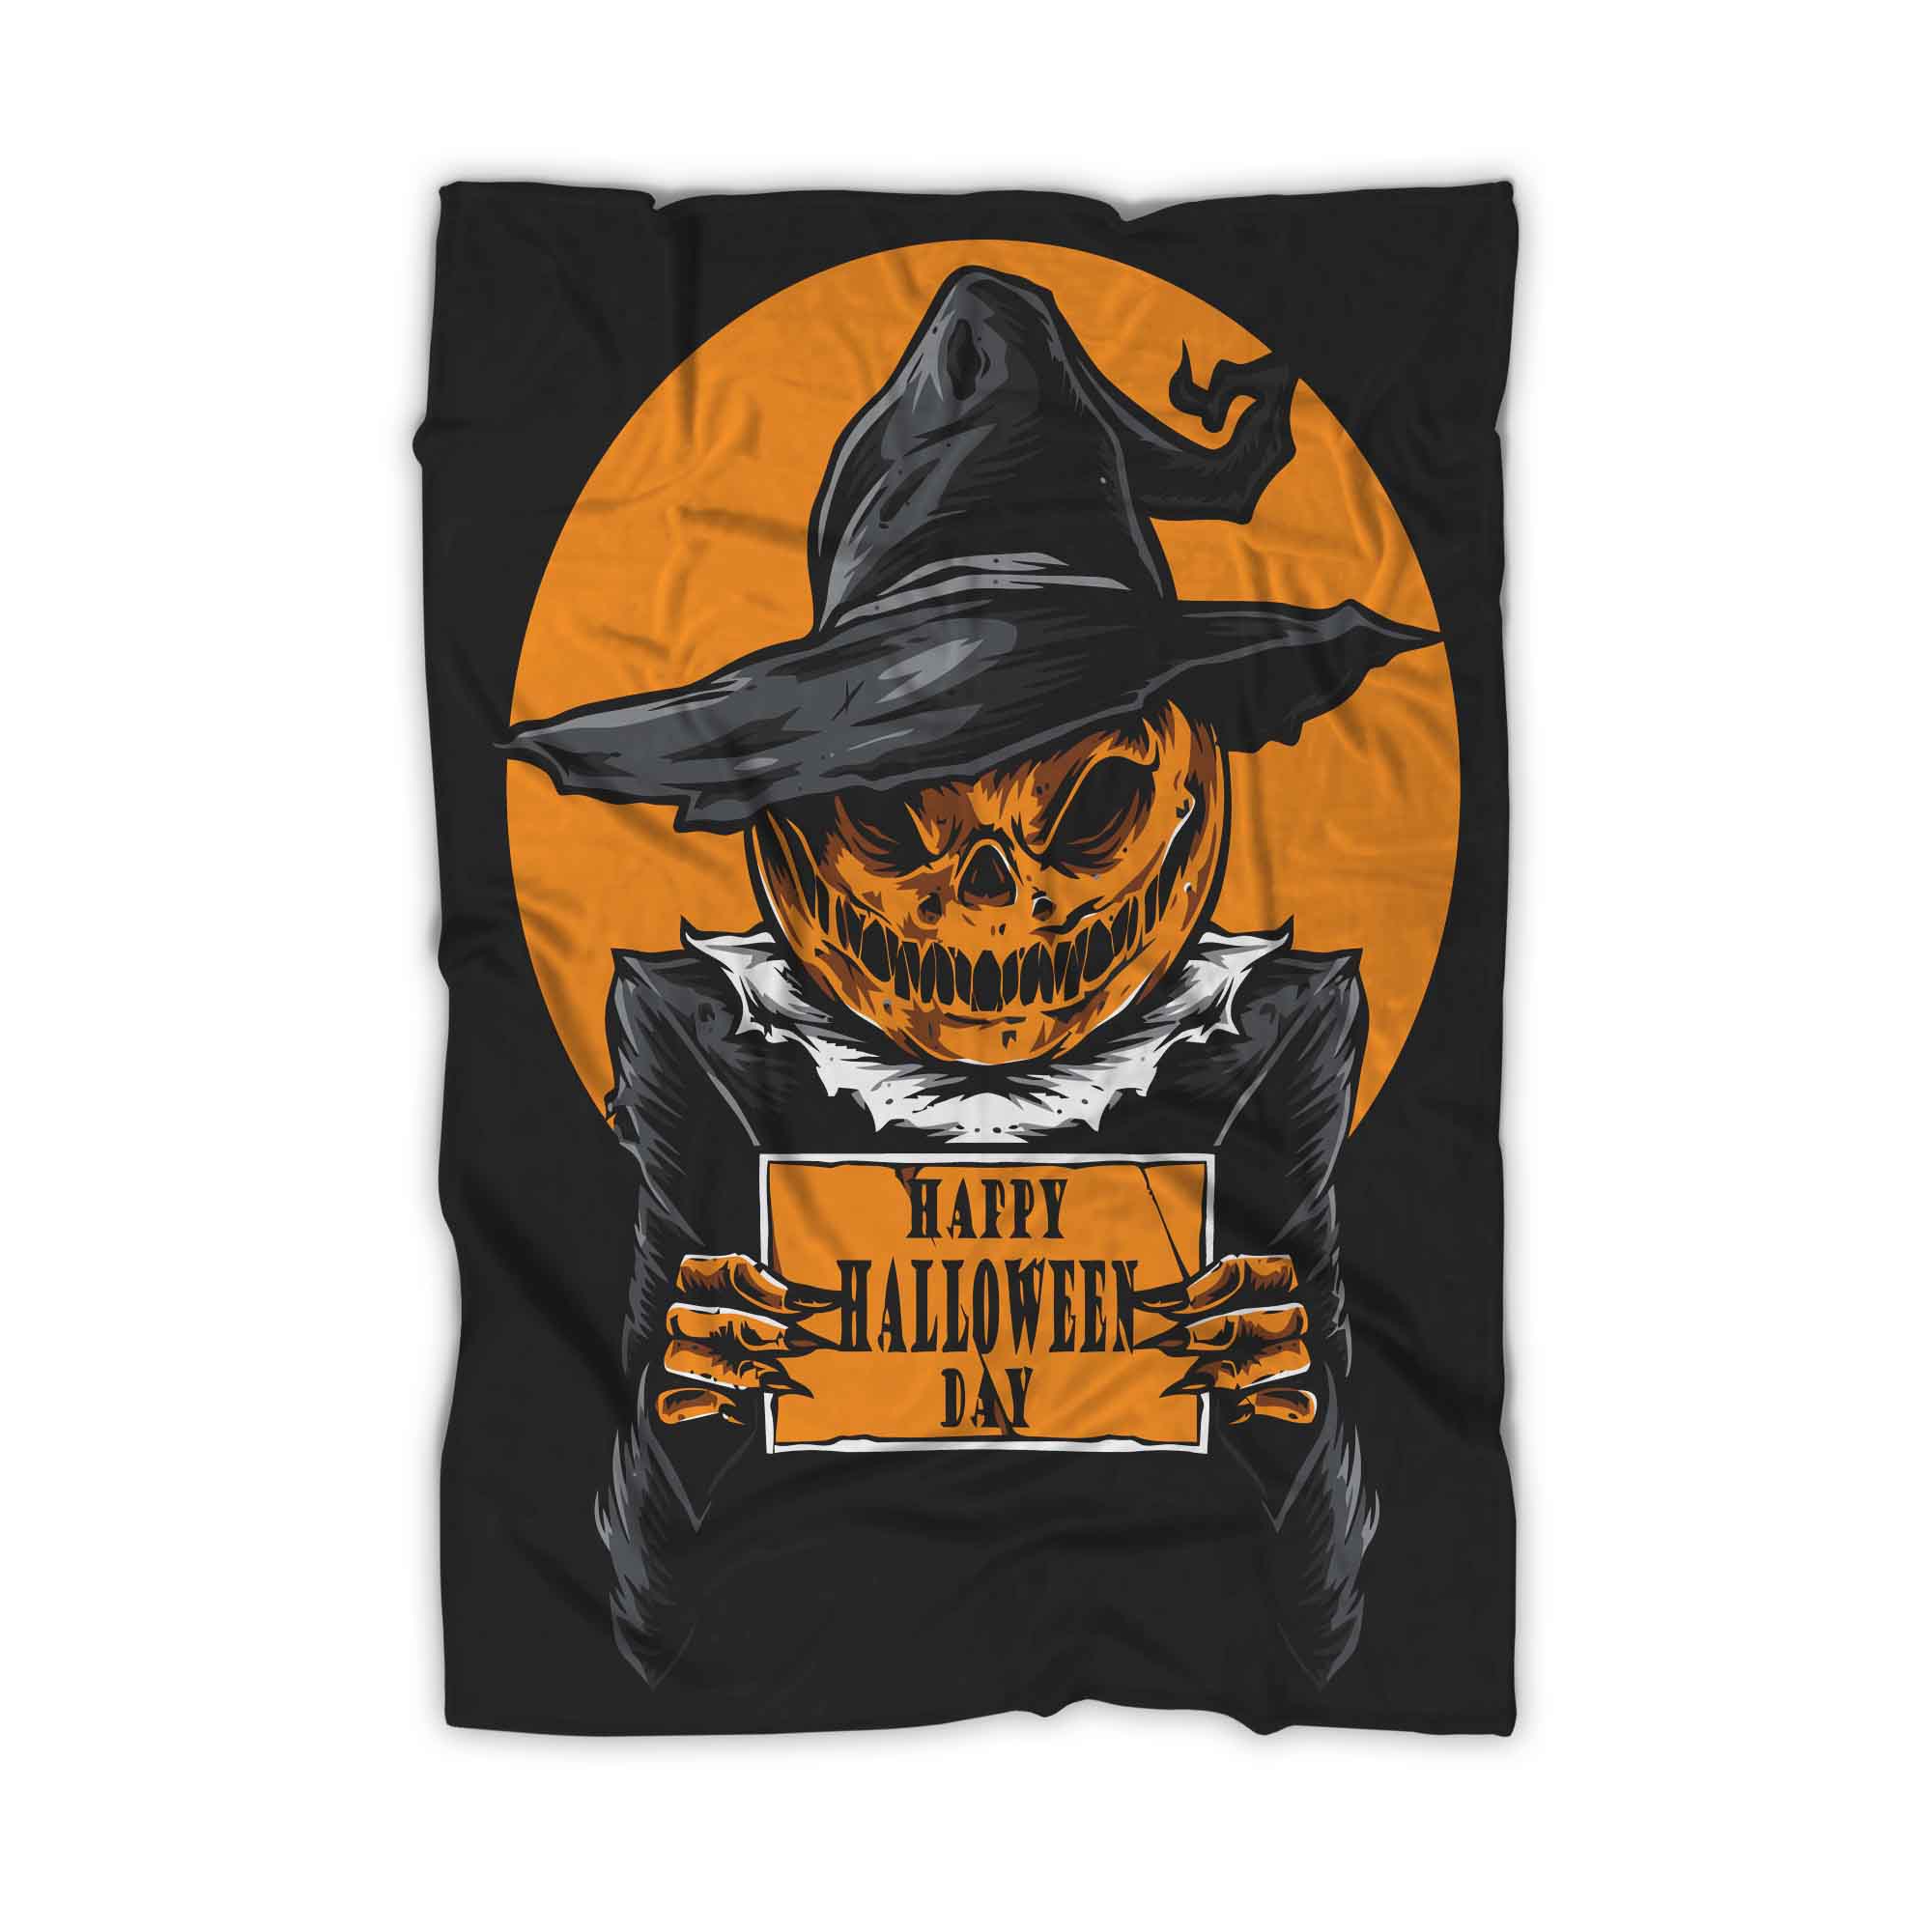 Scary Pumpkins Holding Happy Halloween Day Poster Blanket